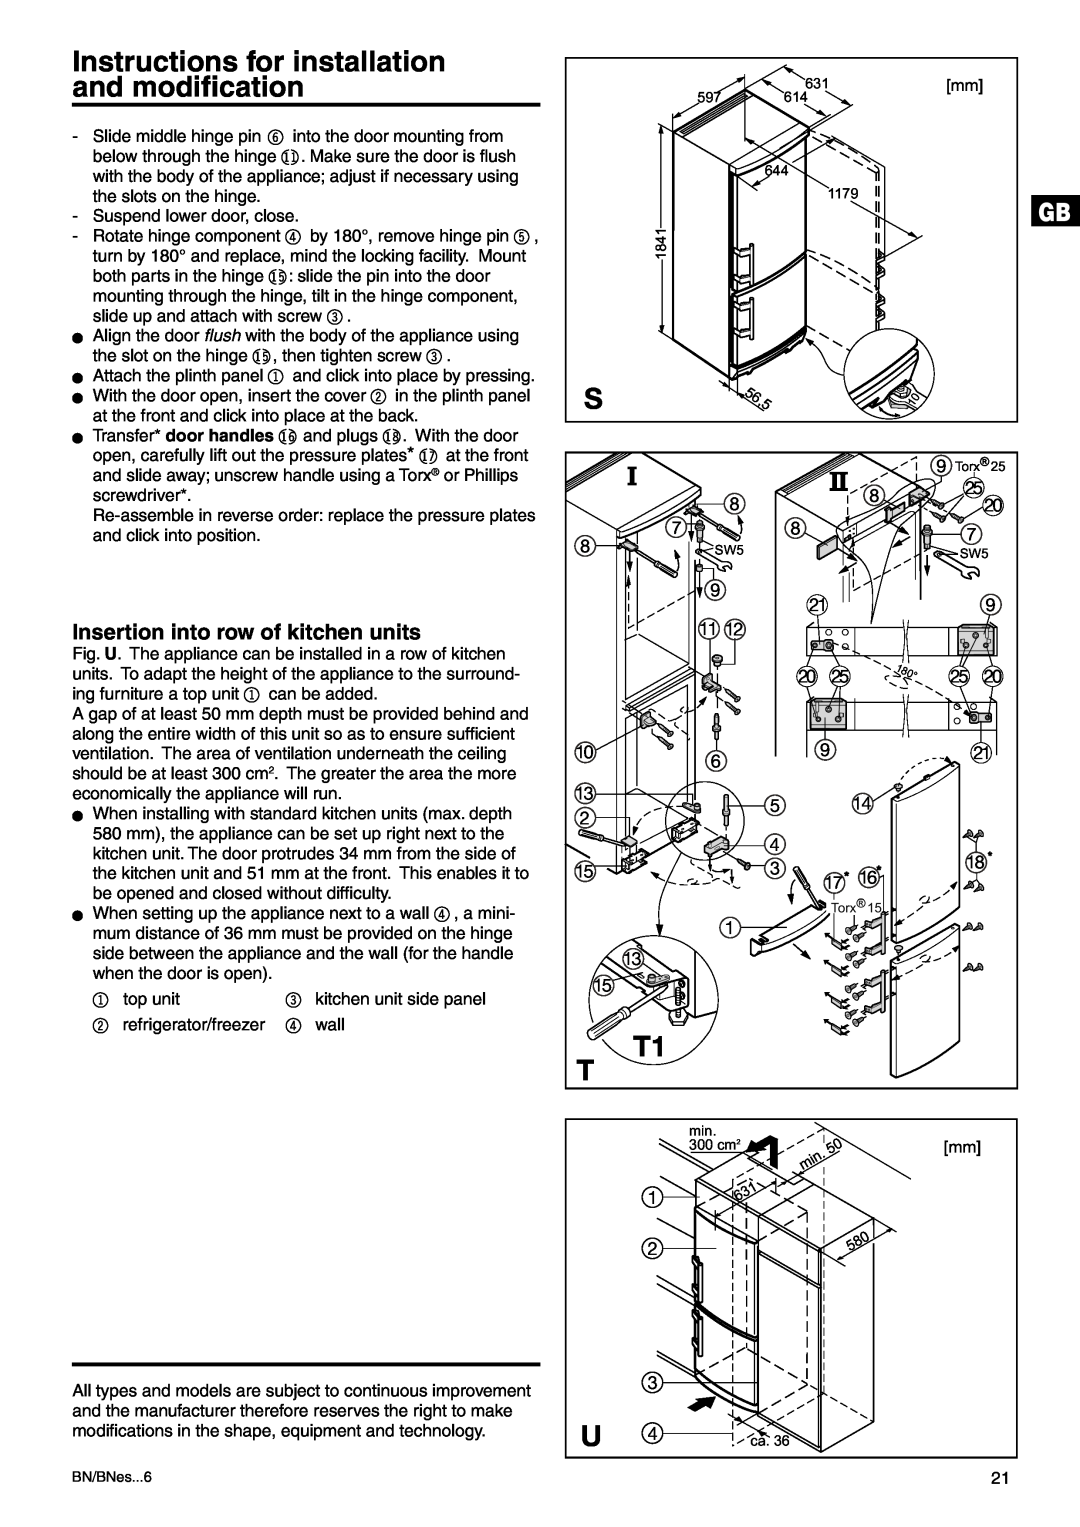 Liebherr 7082 218-03 manual Instructions for installation and modiﬁcation, Insertion into row of kitchen units 